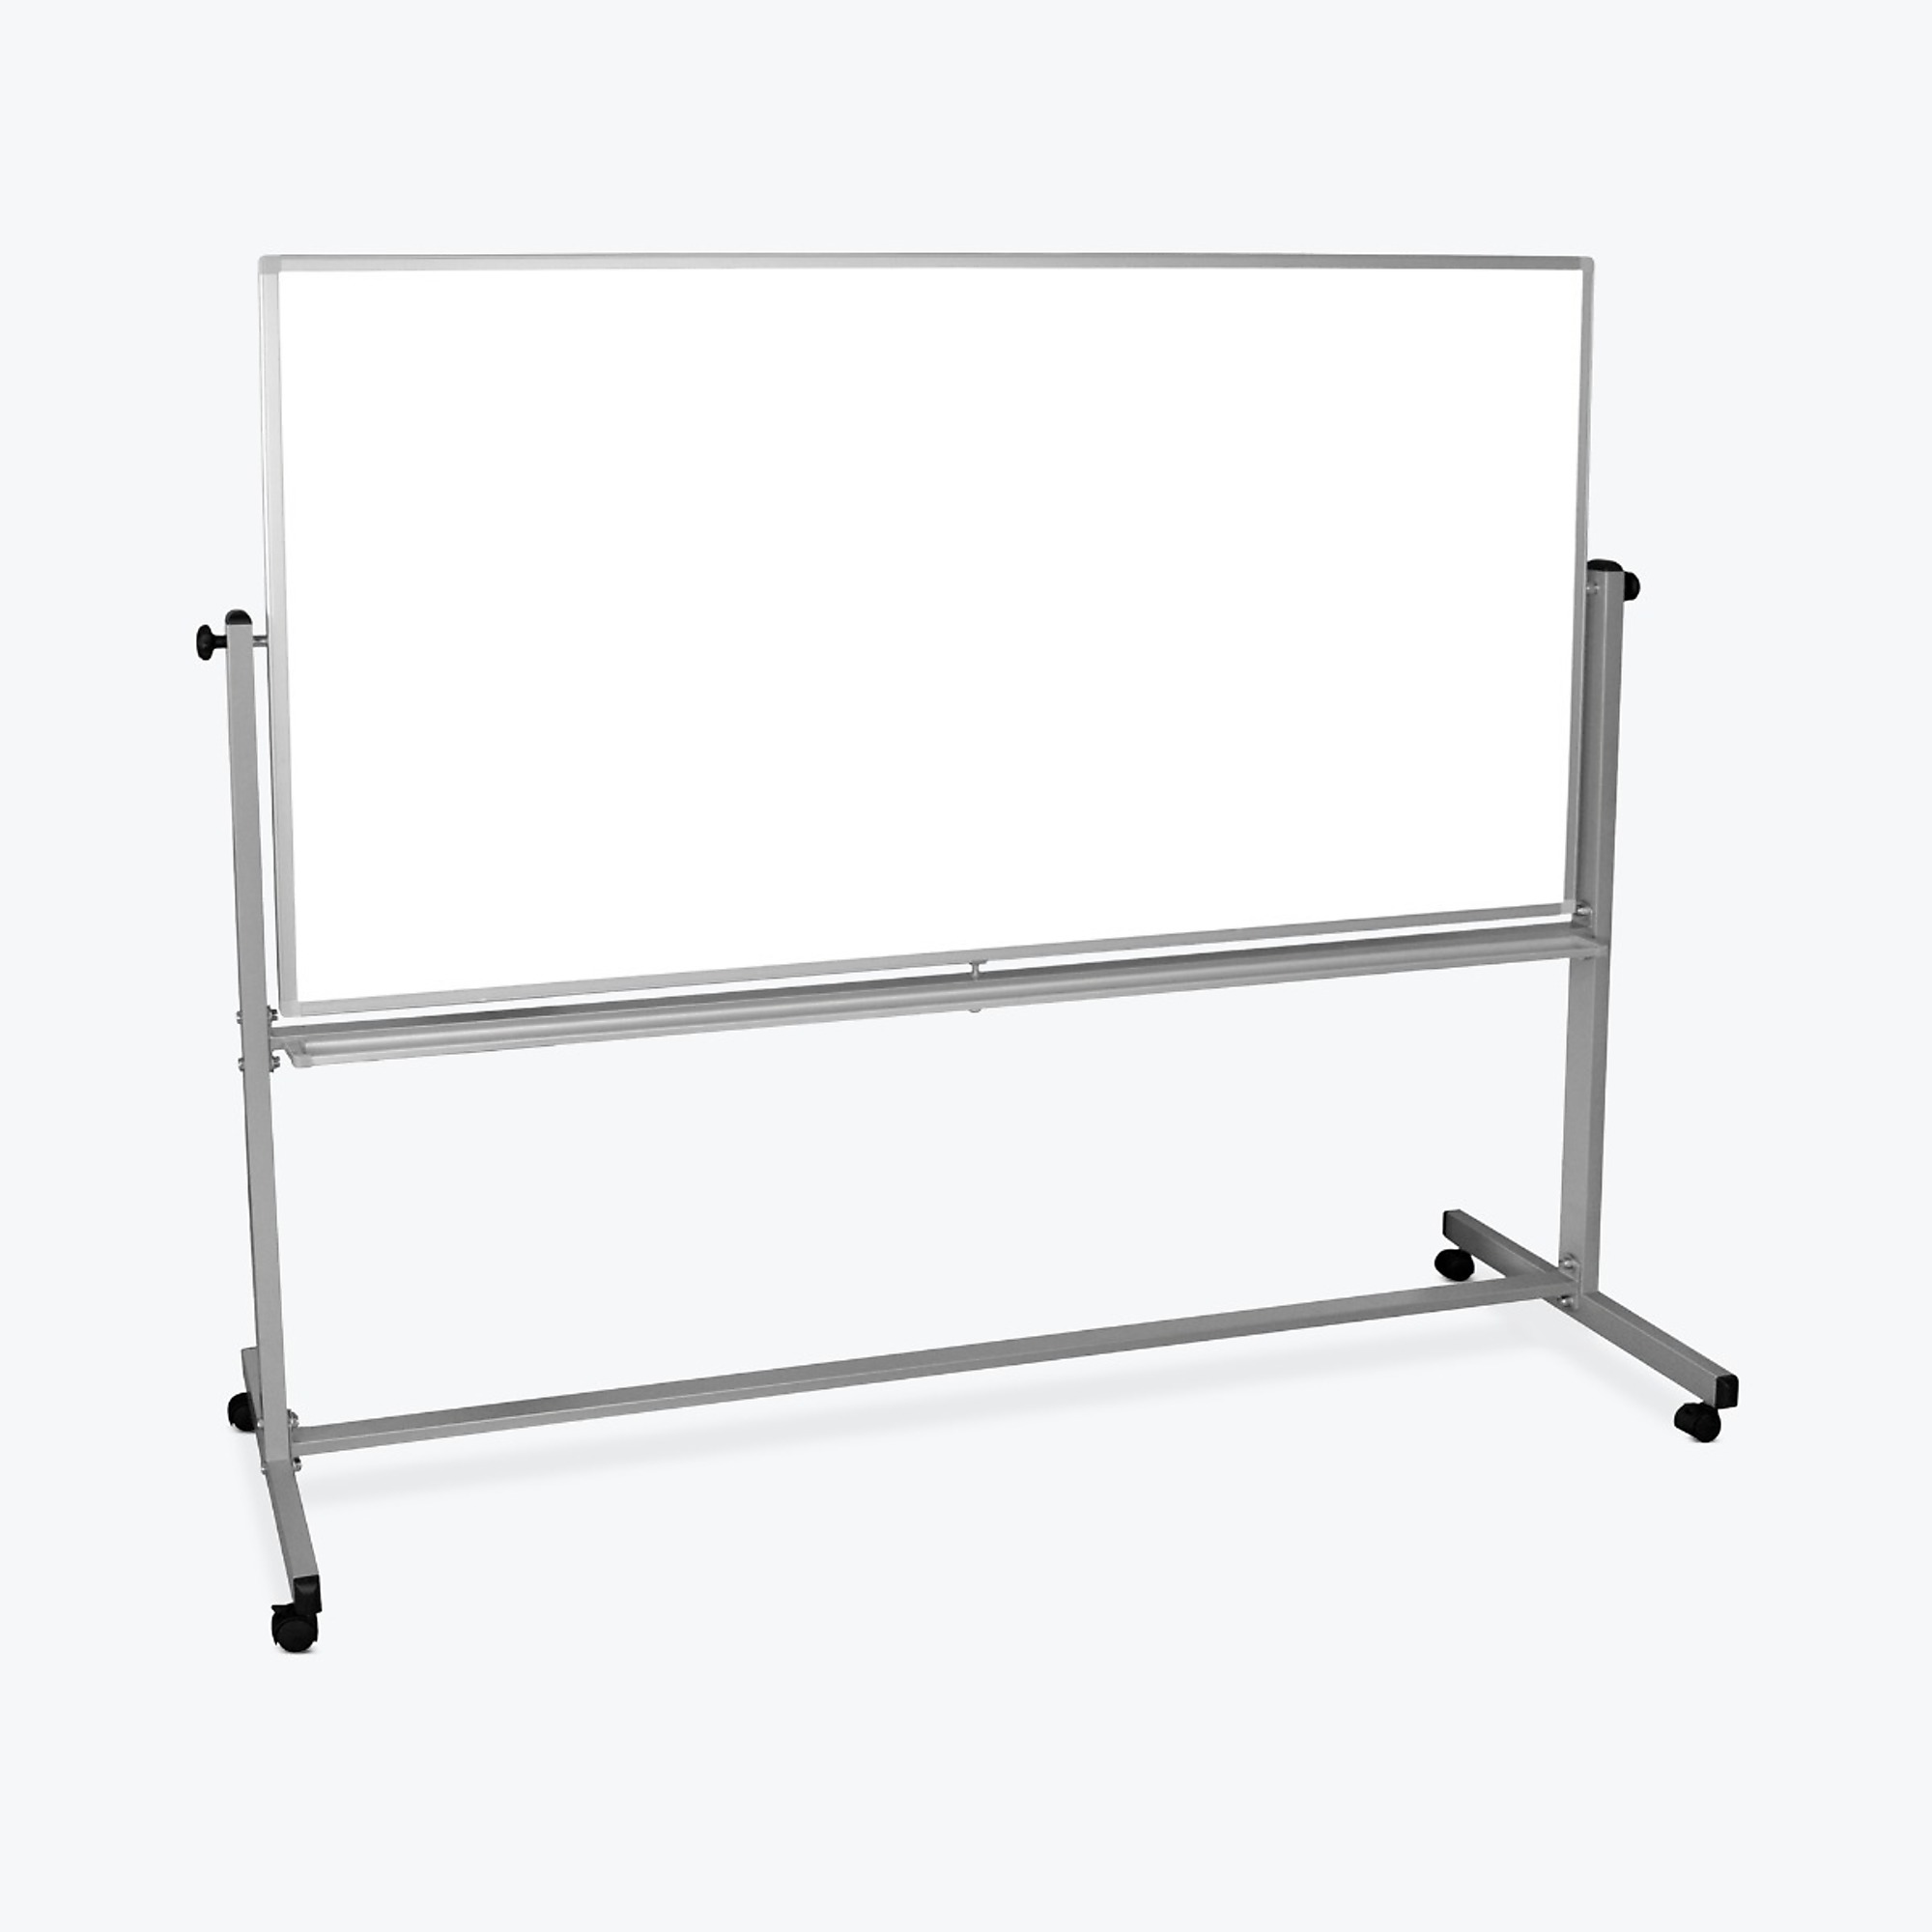 Mobile Magnetic Dry Erase Board, Color Finish White, Pieces (qty.) 1, Material Steel, Model - Luxor MB7240WW